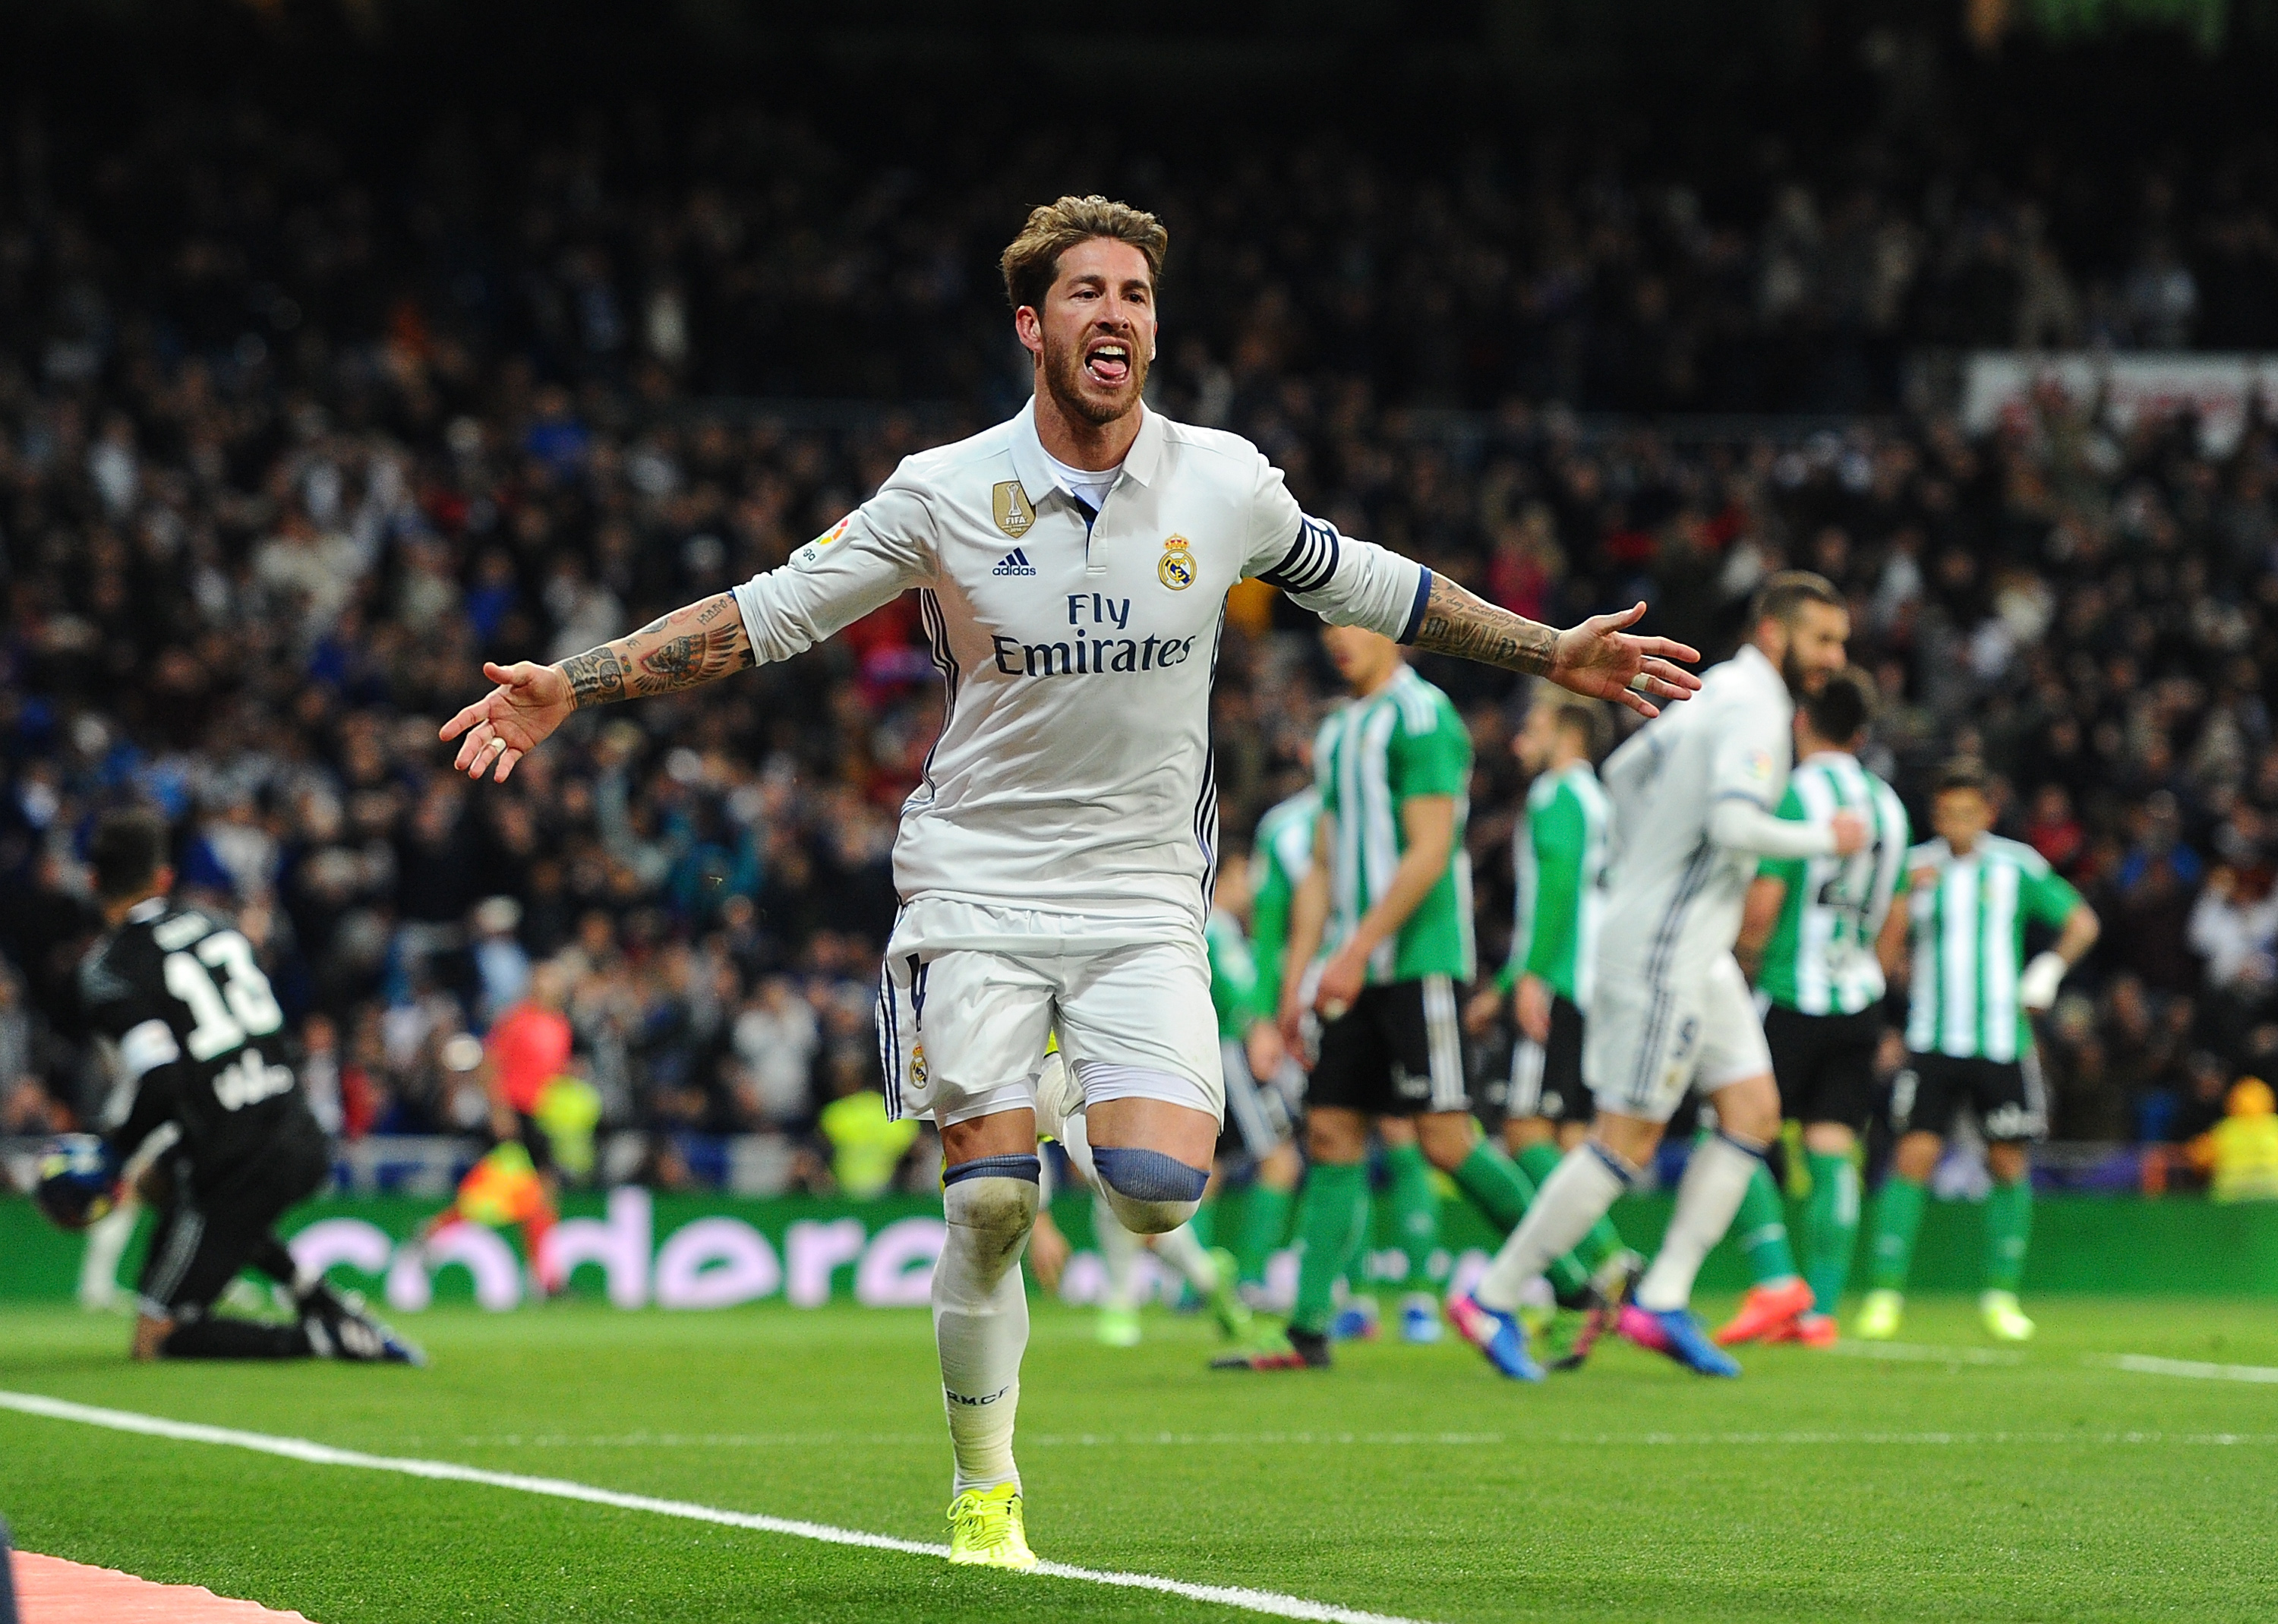 MADRID, SPAIN - MARCH 12:  Sergio Ramos of Real Madrid celebrates after scoring Real's 2nd goal during the La Liga match between Real Madrid CF and Real Betis Balompie at Estadio Santiago Bernabeu on March 12, 2017 in Madrid, Spain.  (Photo by Denis Doyle/Getty Images)